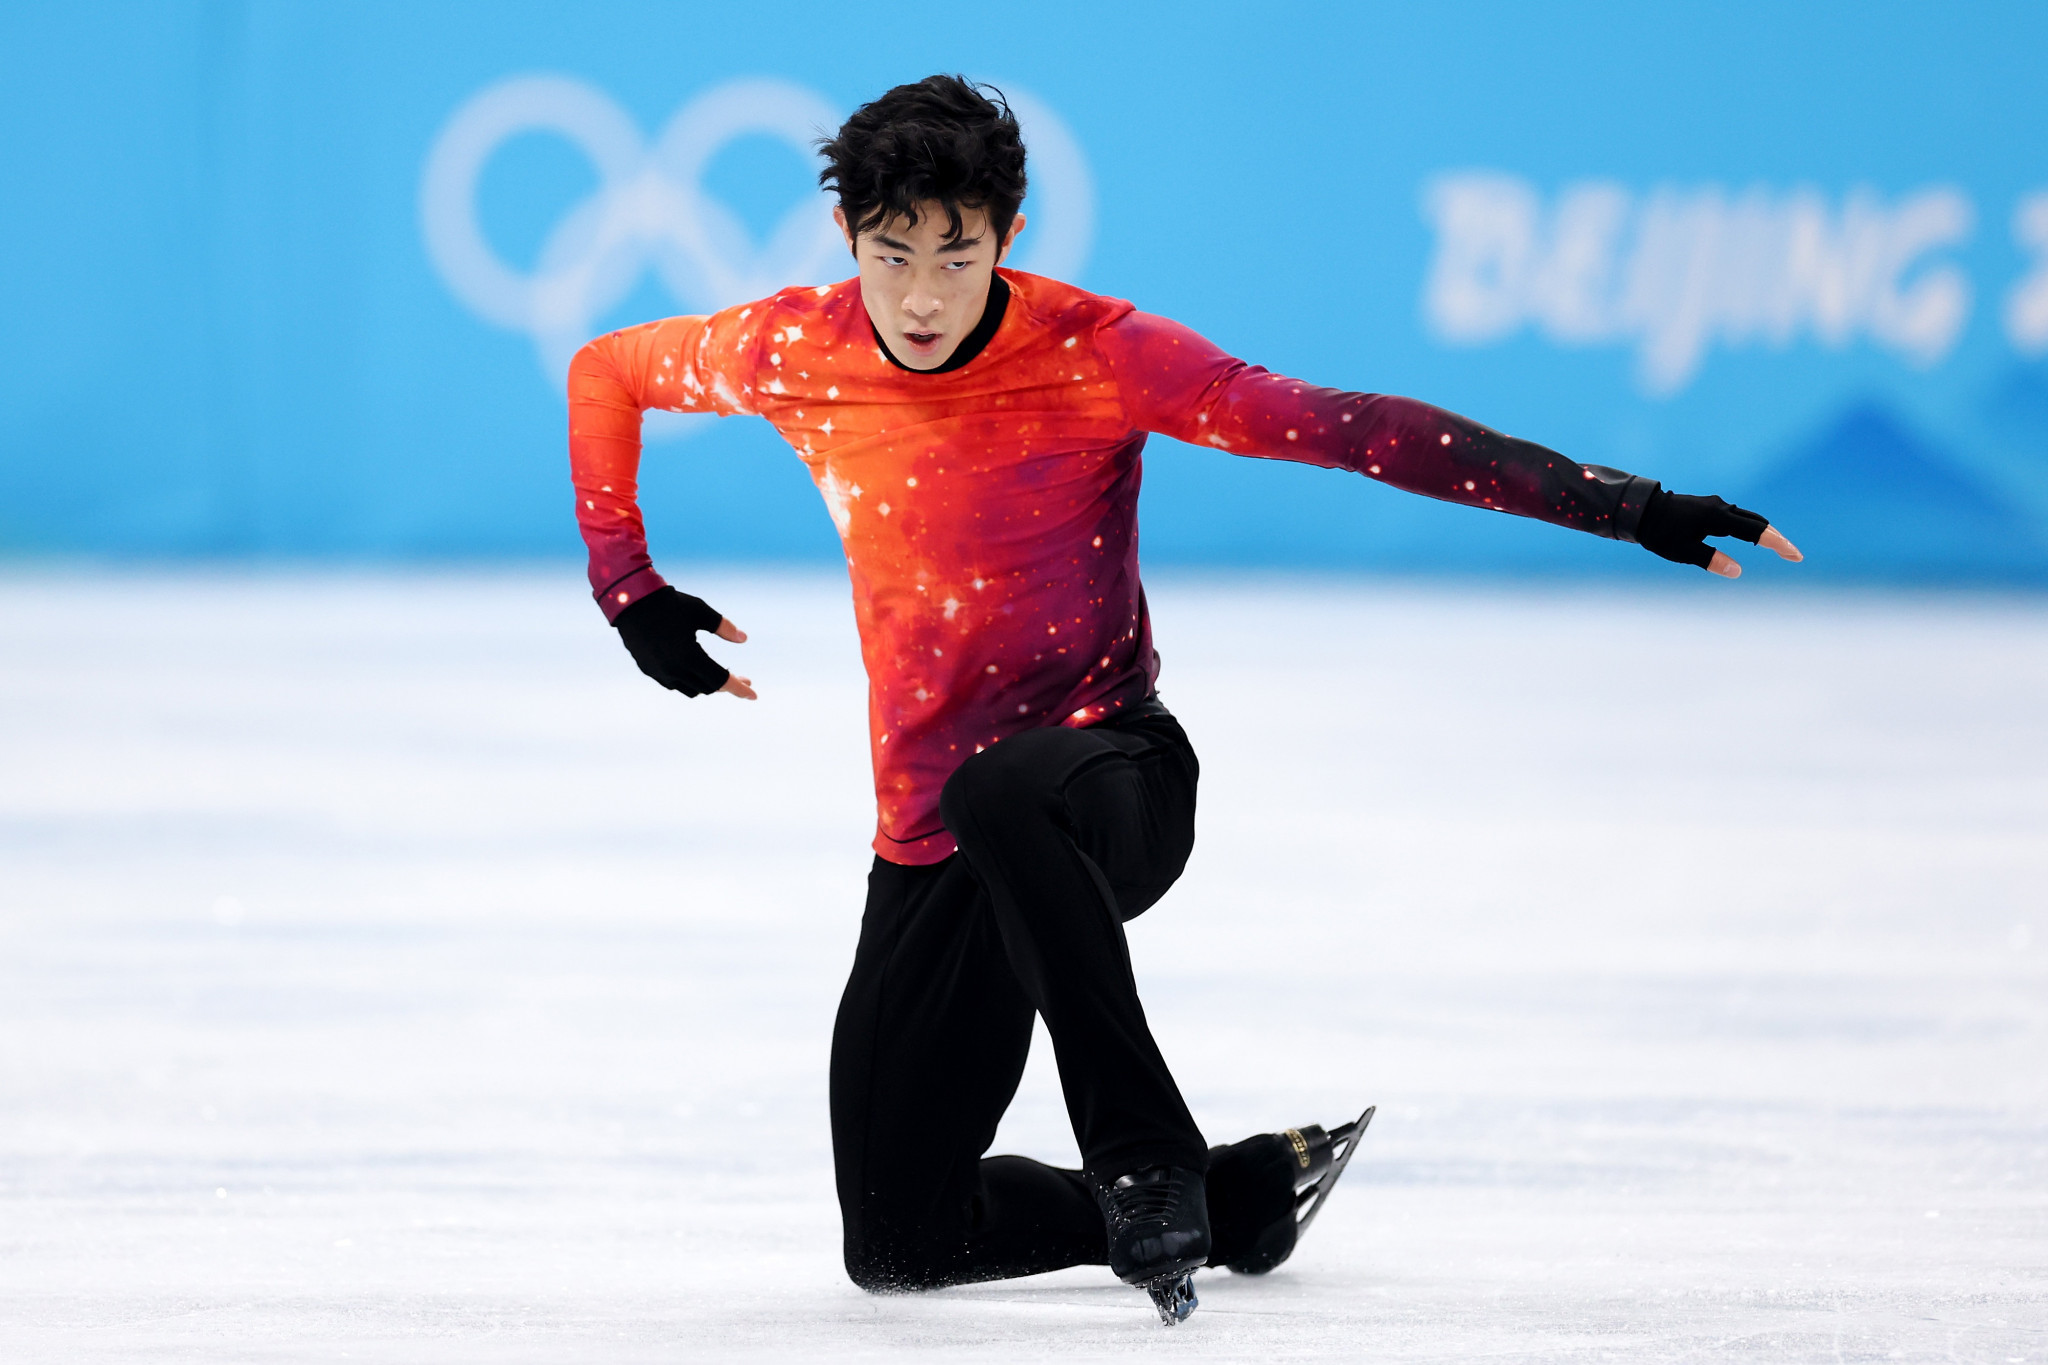 American figure skater Nathan Chen has yet to receive his Olympic team medal due to the ongoing Kamila Valieva case ©Getty Images